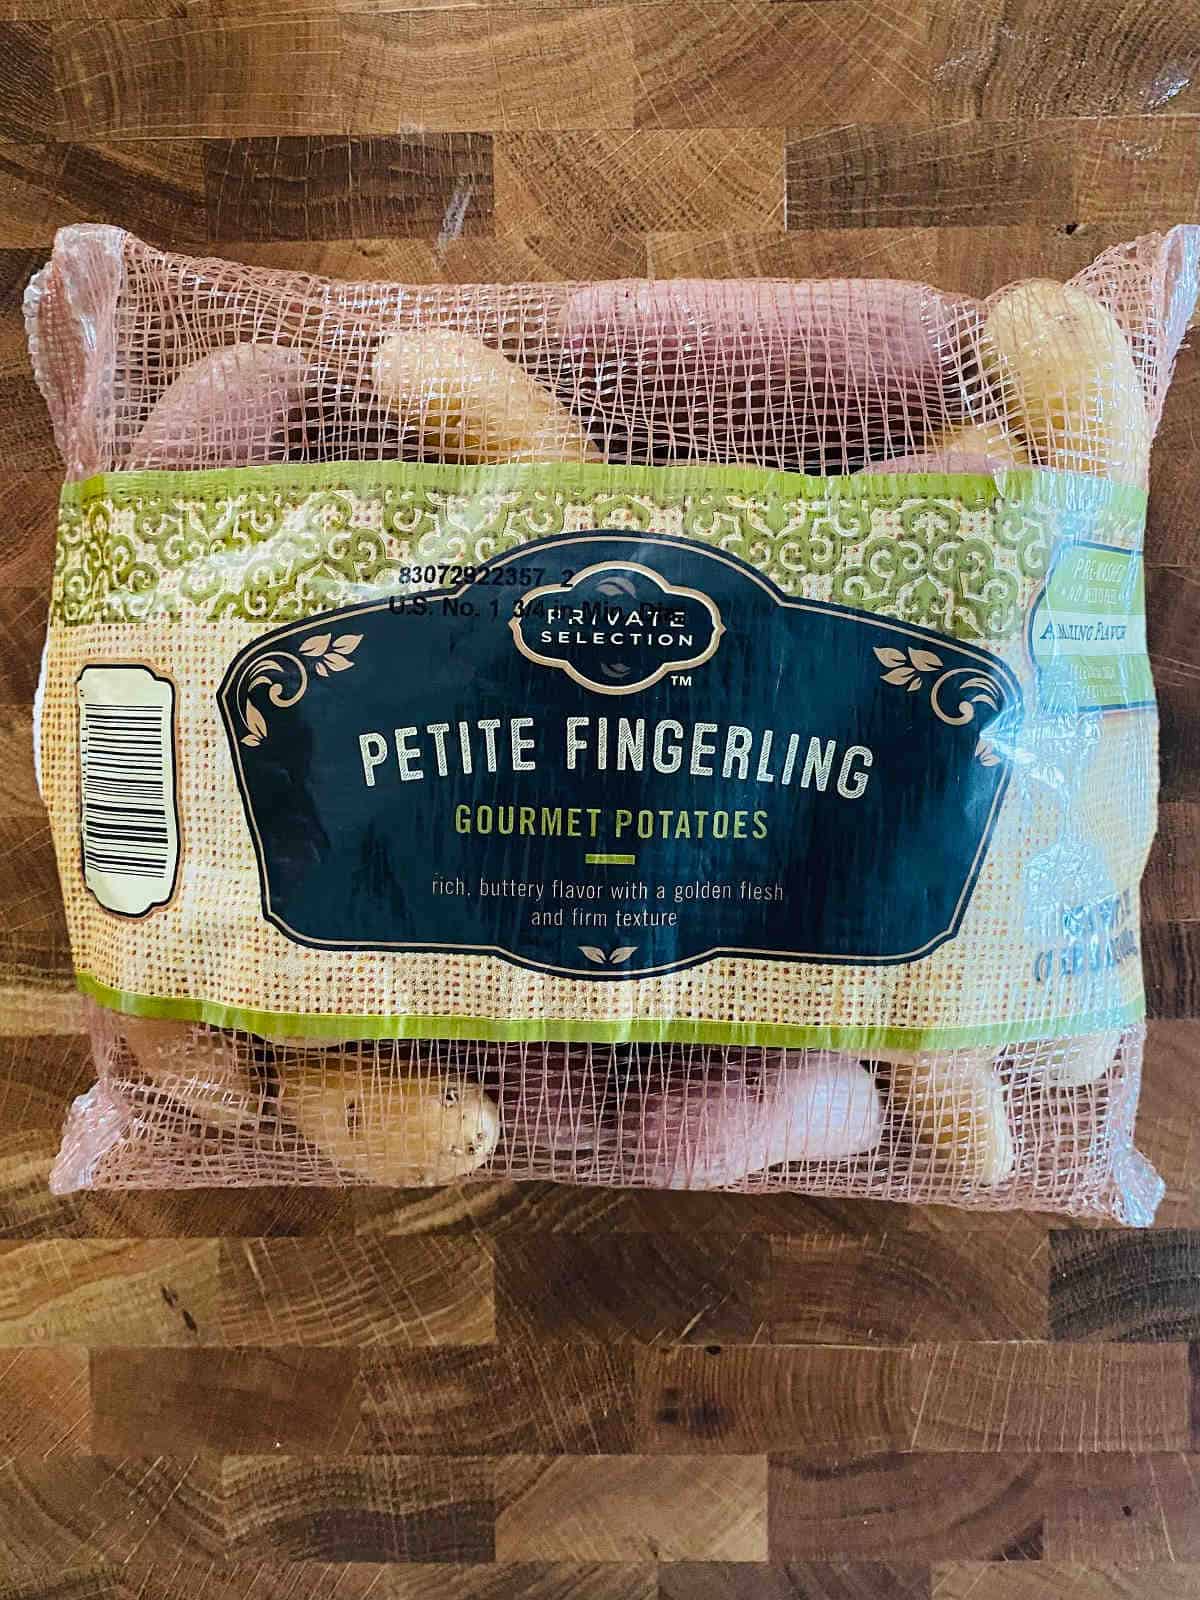 bag of Safeway private selection colored fingerling potatoes.